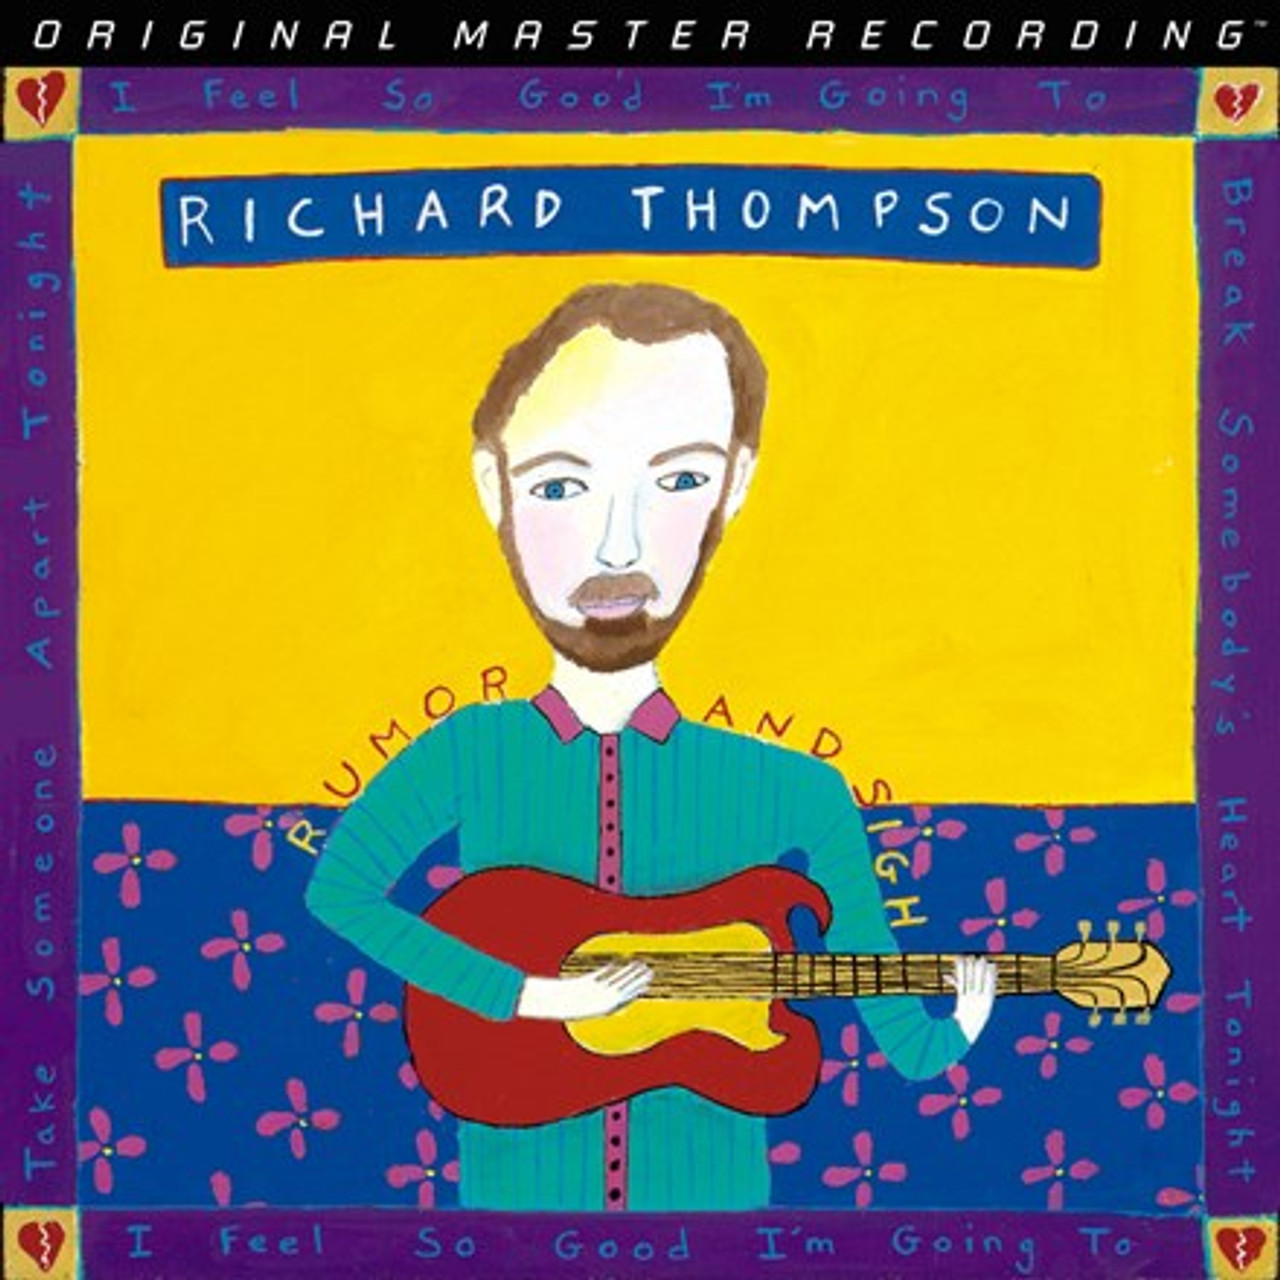 Richard Thompson - Rumor and Sigh (Limited to 2